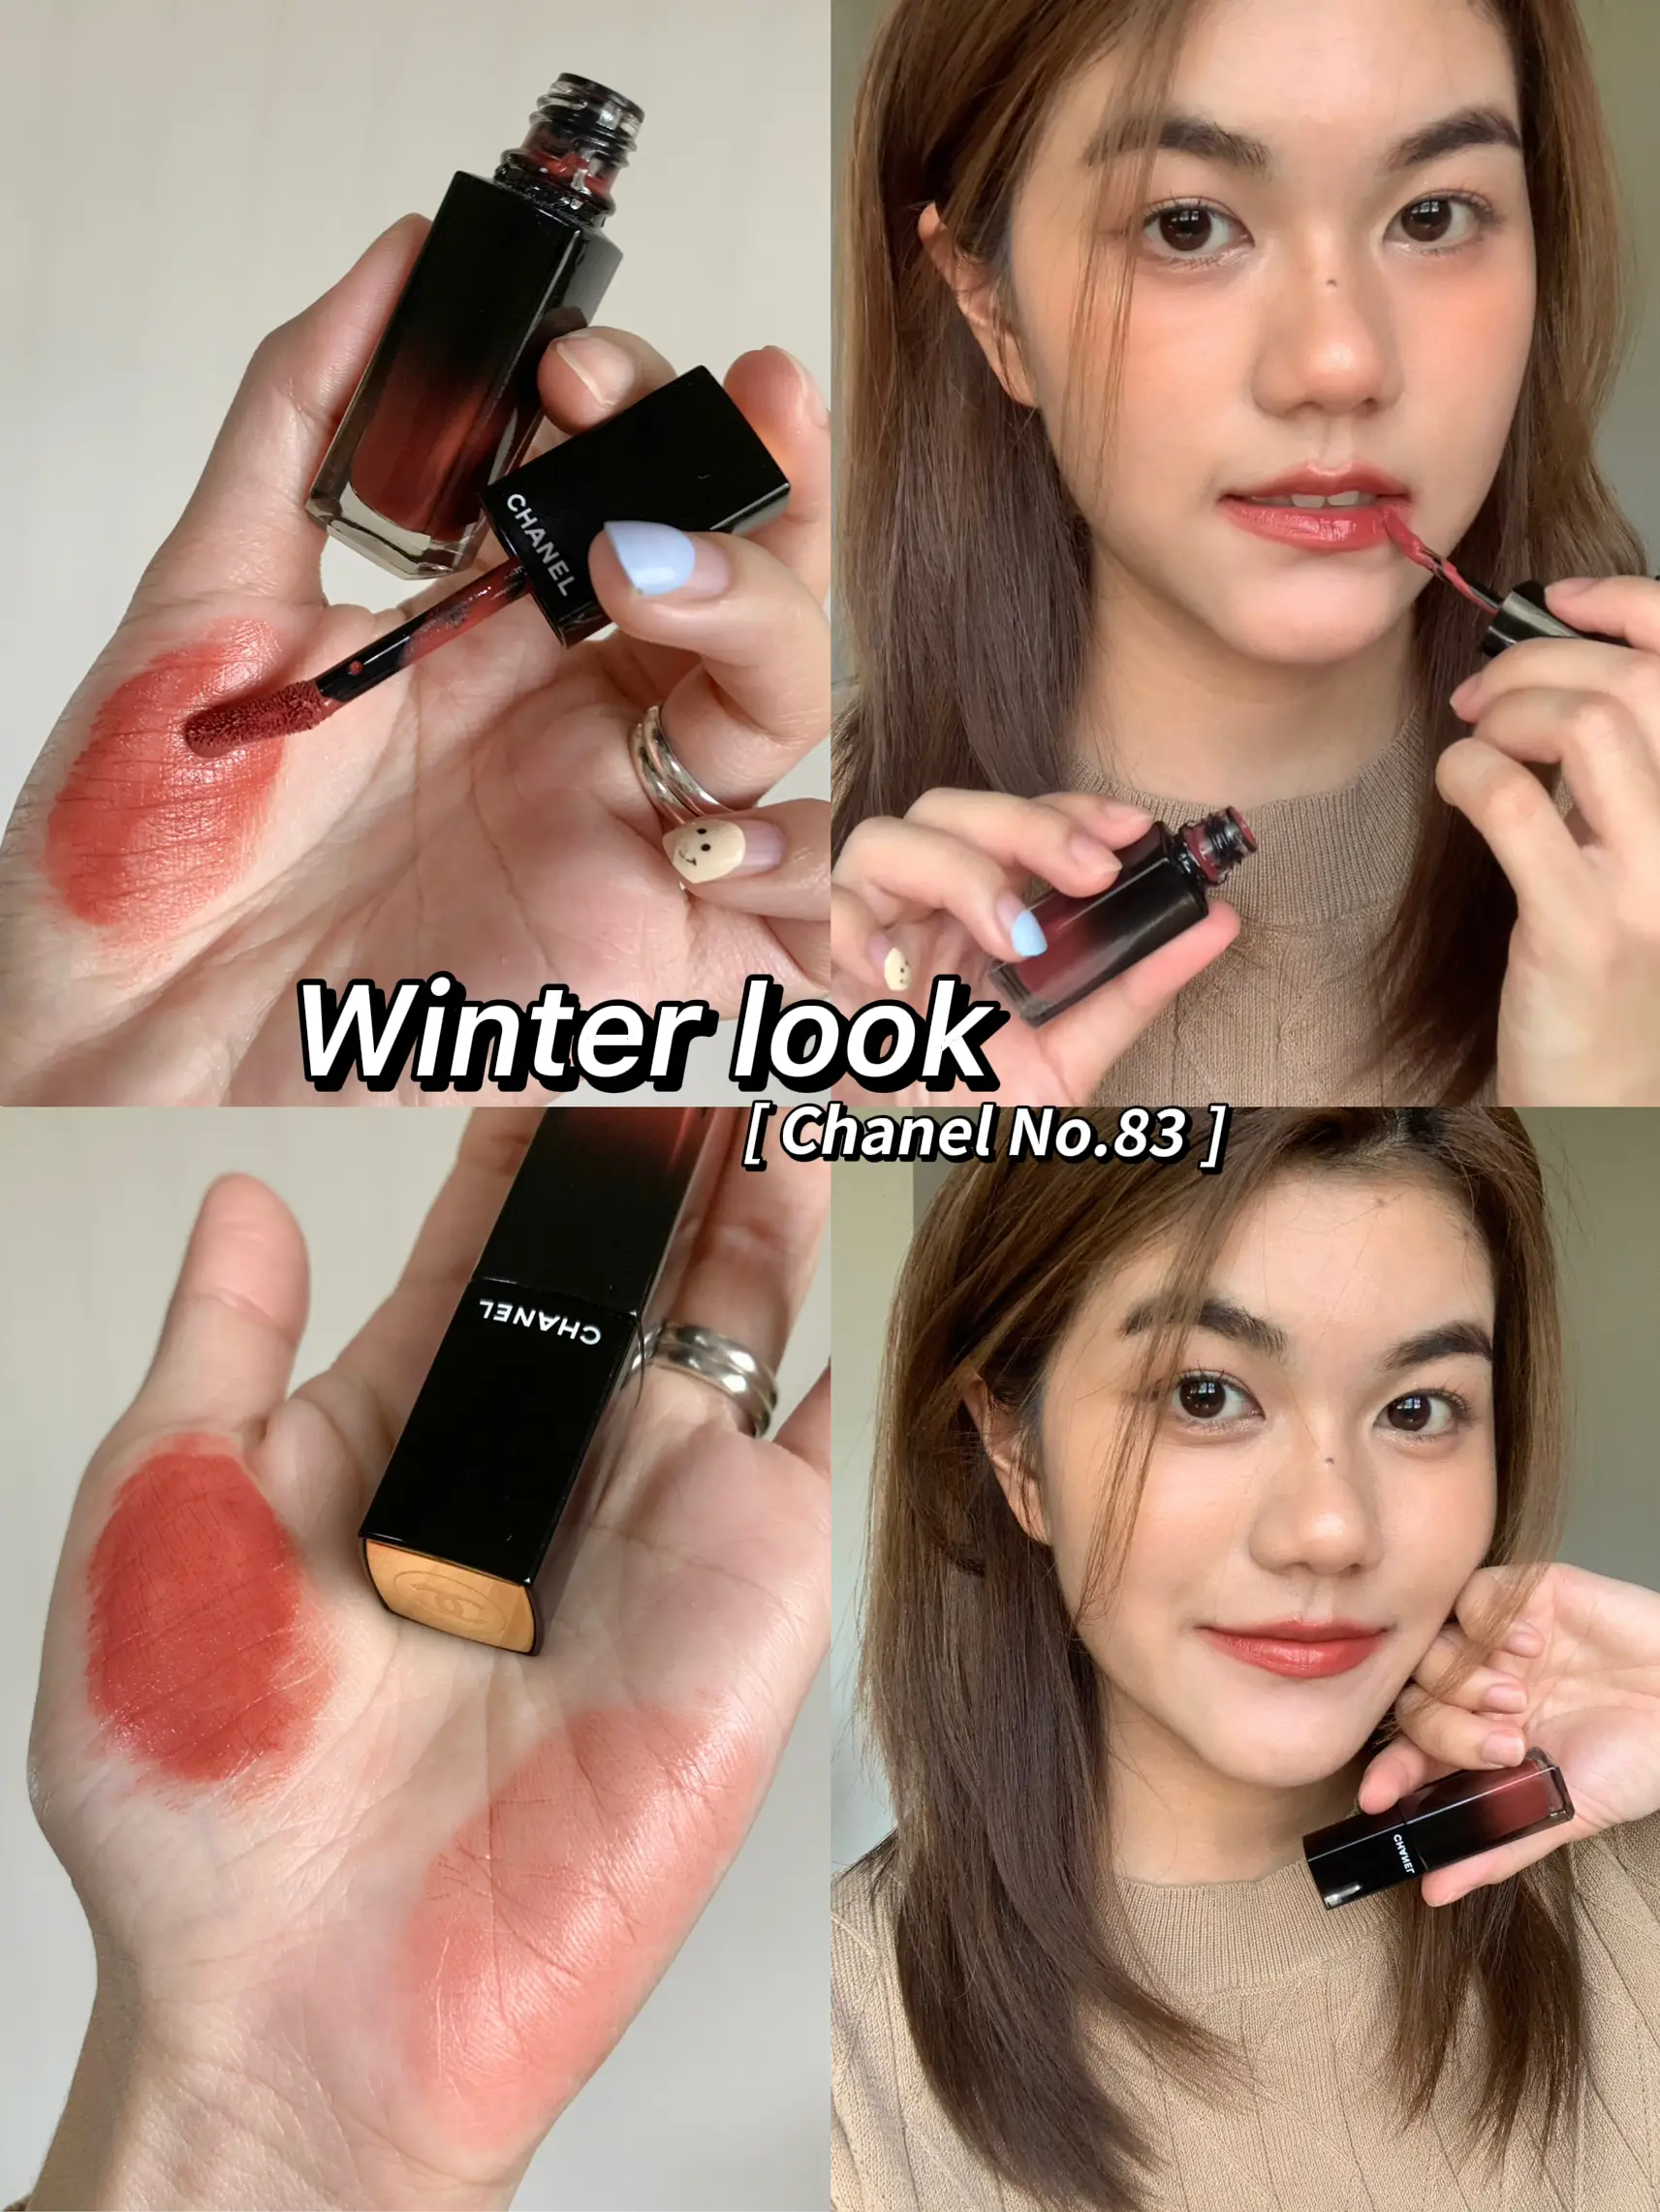 Lip Chanel rouge allure laque number 83 ❄️ winter look driving skin, Gallery posted by Melonkwl 茜然🍉